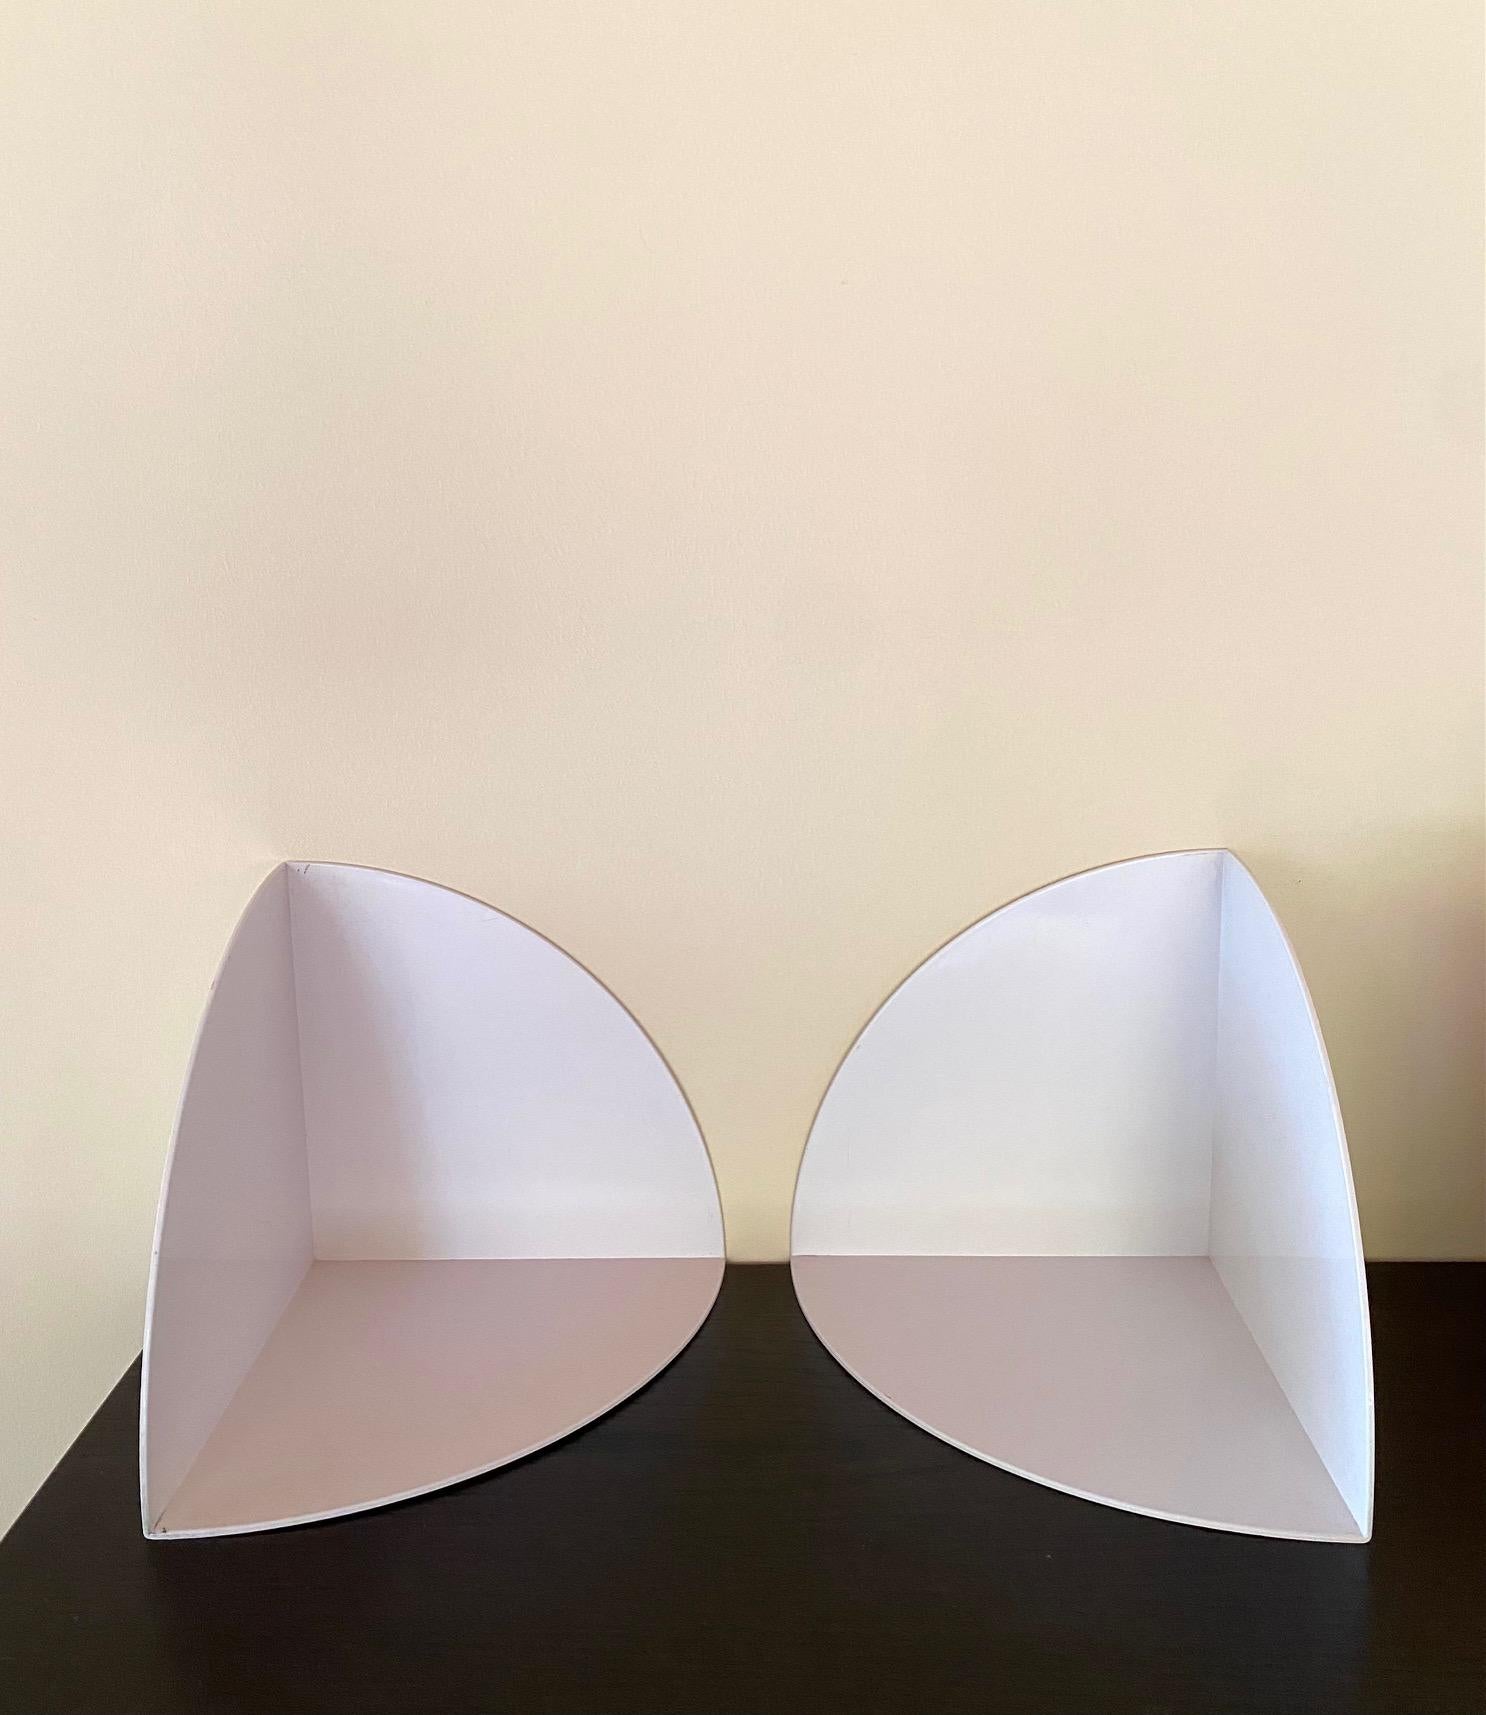 Pair of bookends, Fermalibro 4909, white from kartell, perfect condition. 
There are 2 pairs available.